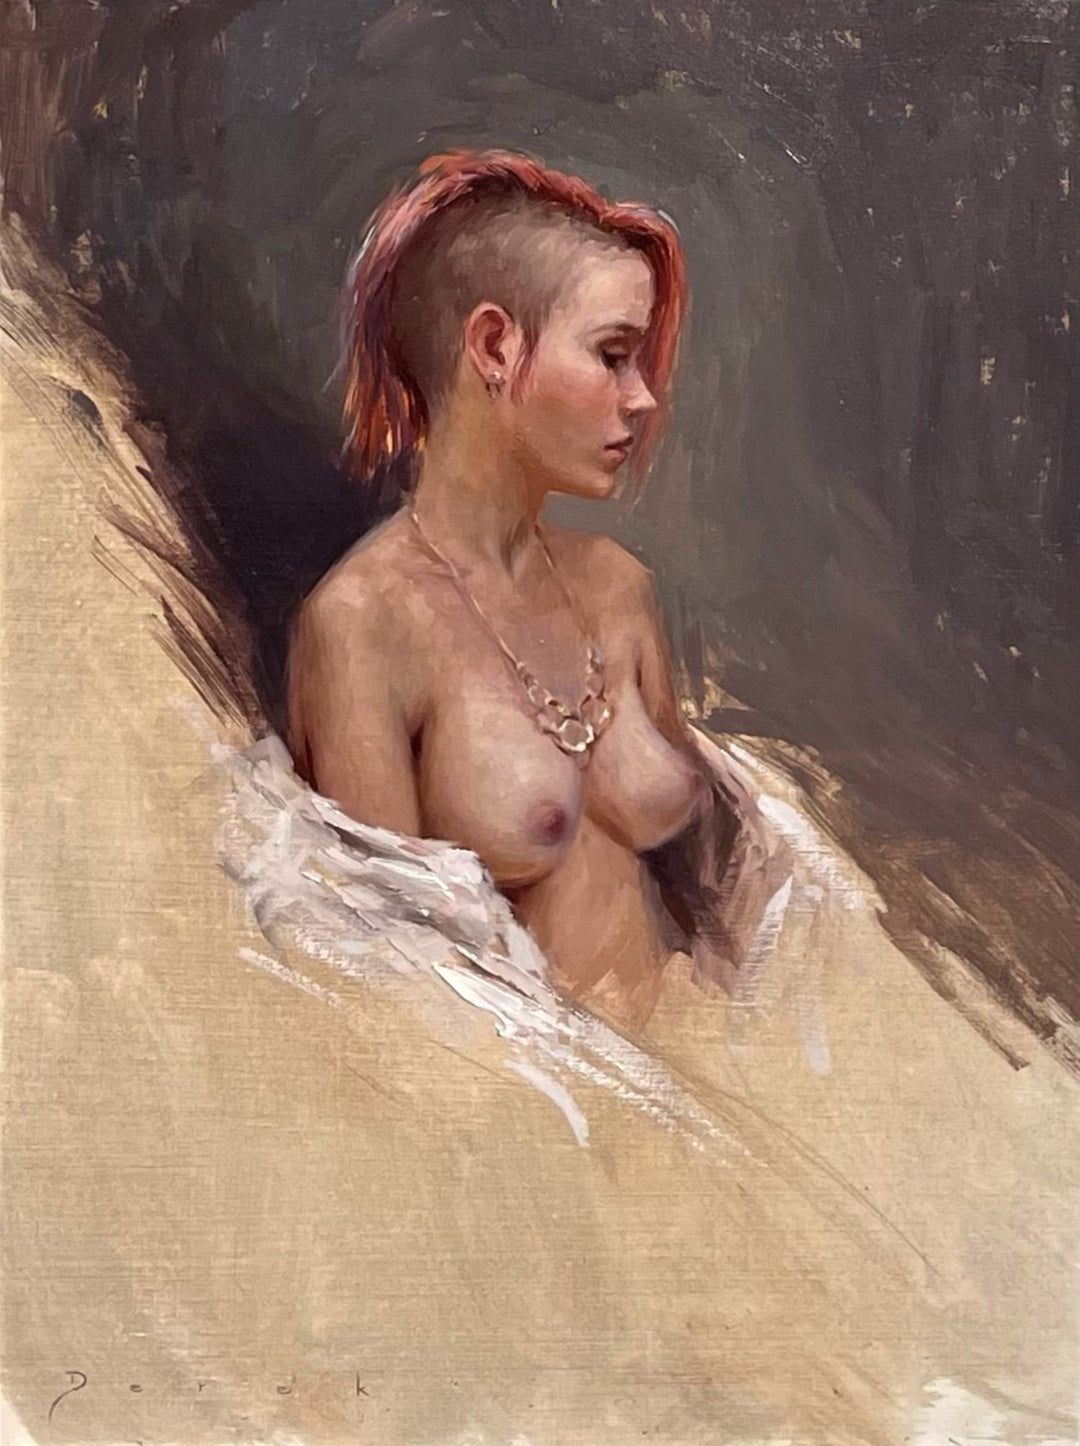 An oil painting of a nude woman with red hair created by Derek Harrison - "Sam, 2016".